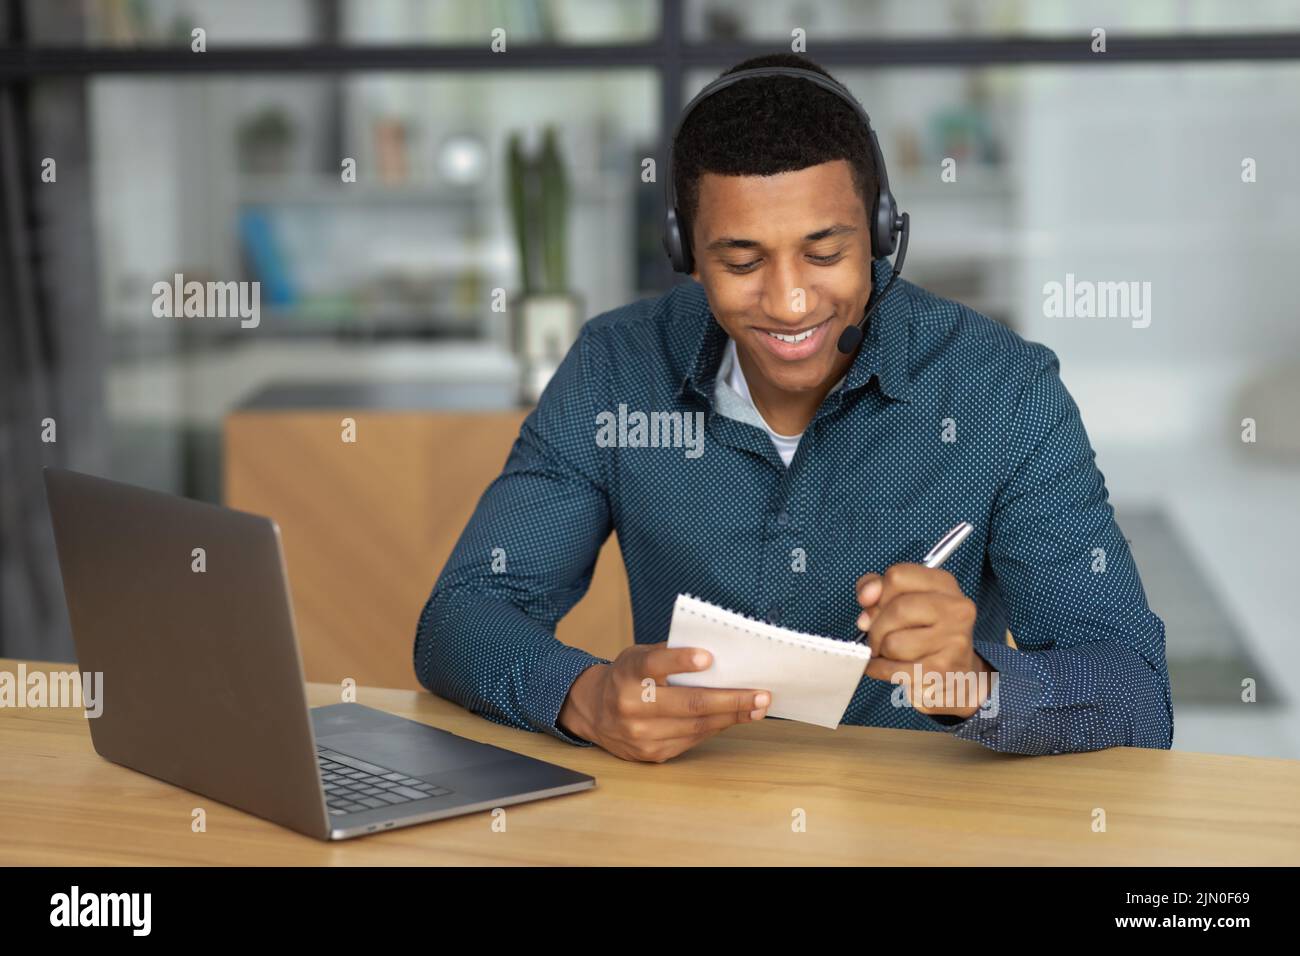 Confident young man Successful student or office worker in headset working using laptop Stock Photo